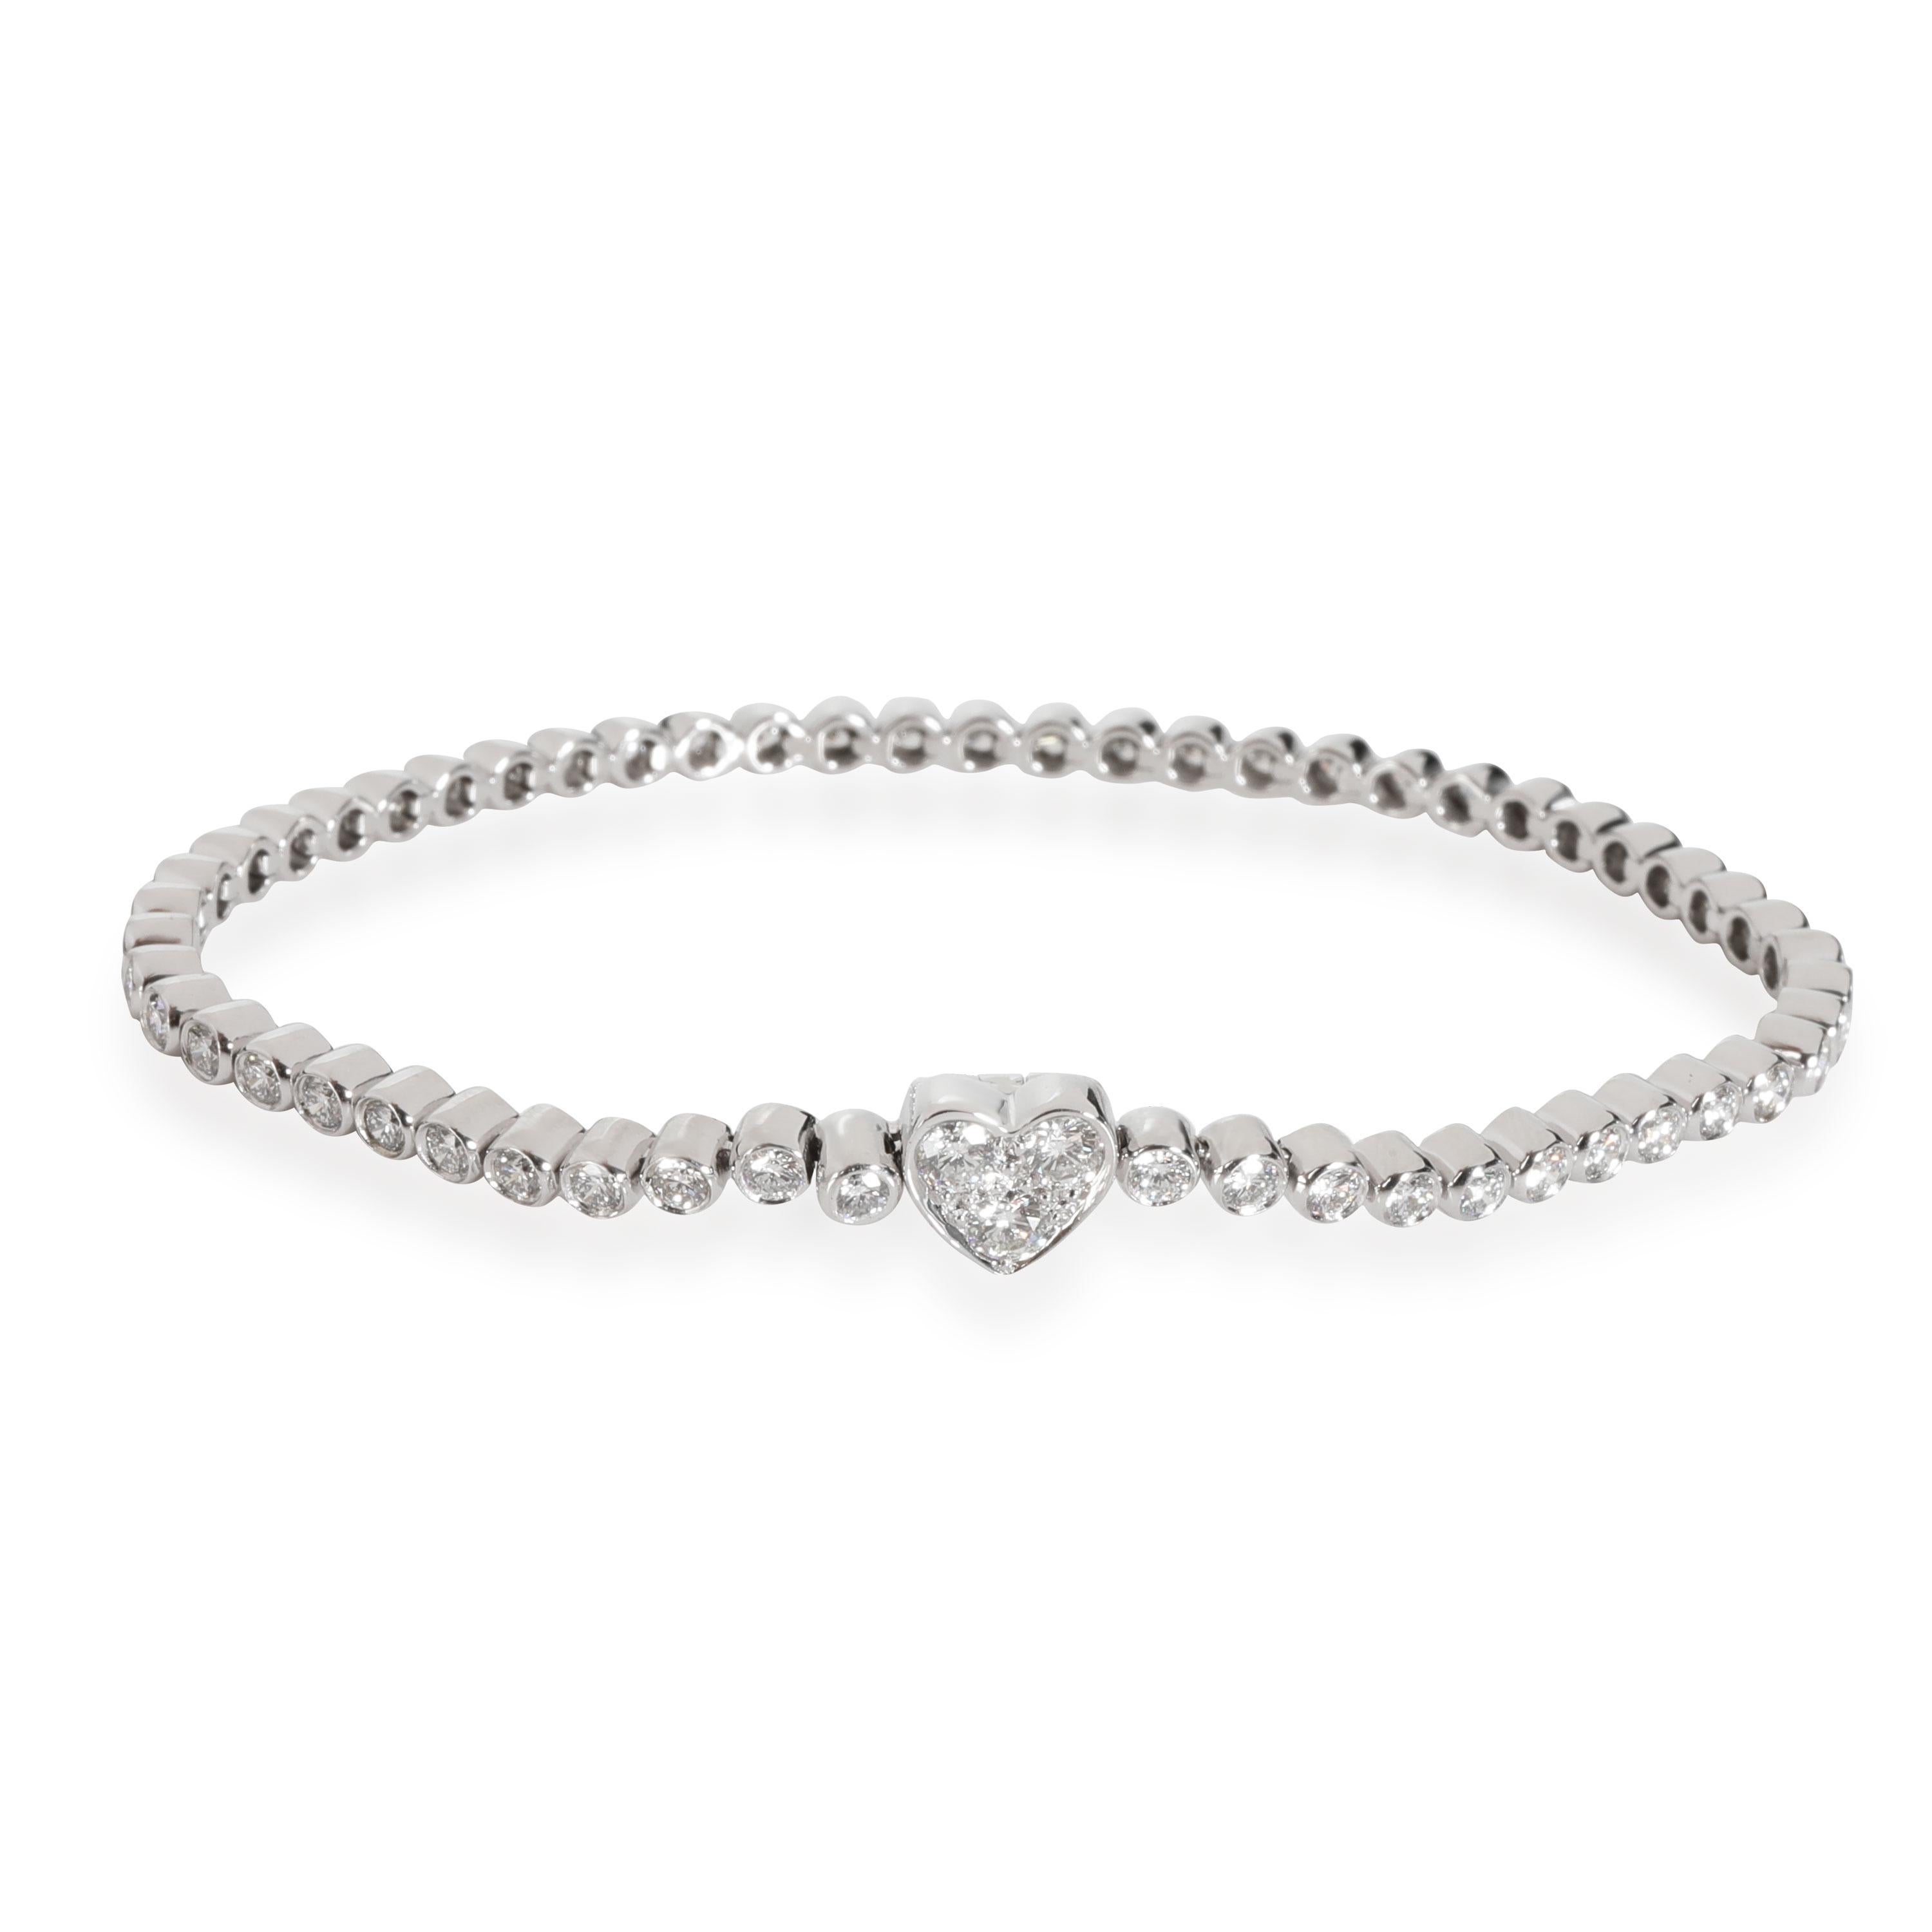 Tiffany & Co. Tiffany Hearts Diamond Bracelet in Platinum 3.00 CTW

PRIMARY DETAILS
SKU: 111565
Listing Title: Tiffany & Co. Tiffany Hearts Diamond Bracelet in Platinum 3.00 CTW
Condition Description: Retails for 15000 USD. In excellent condition